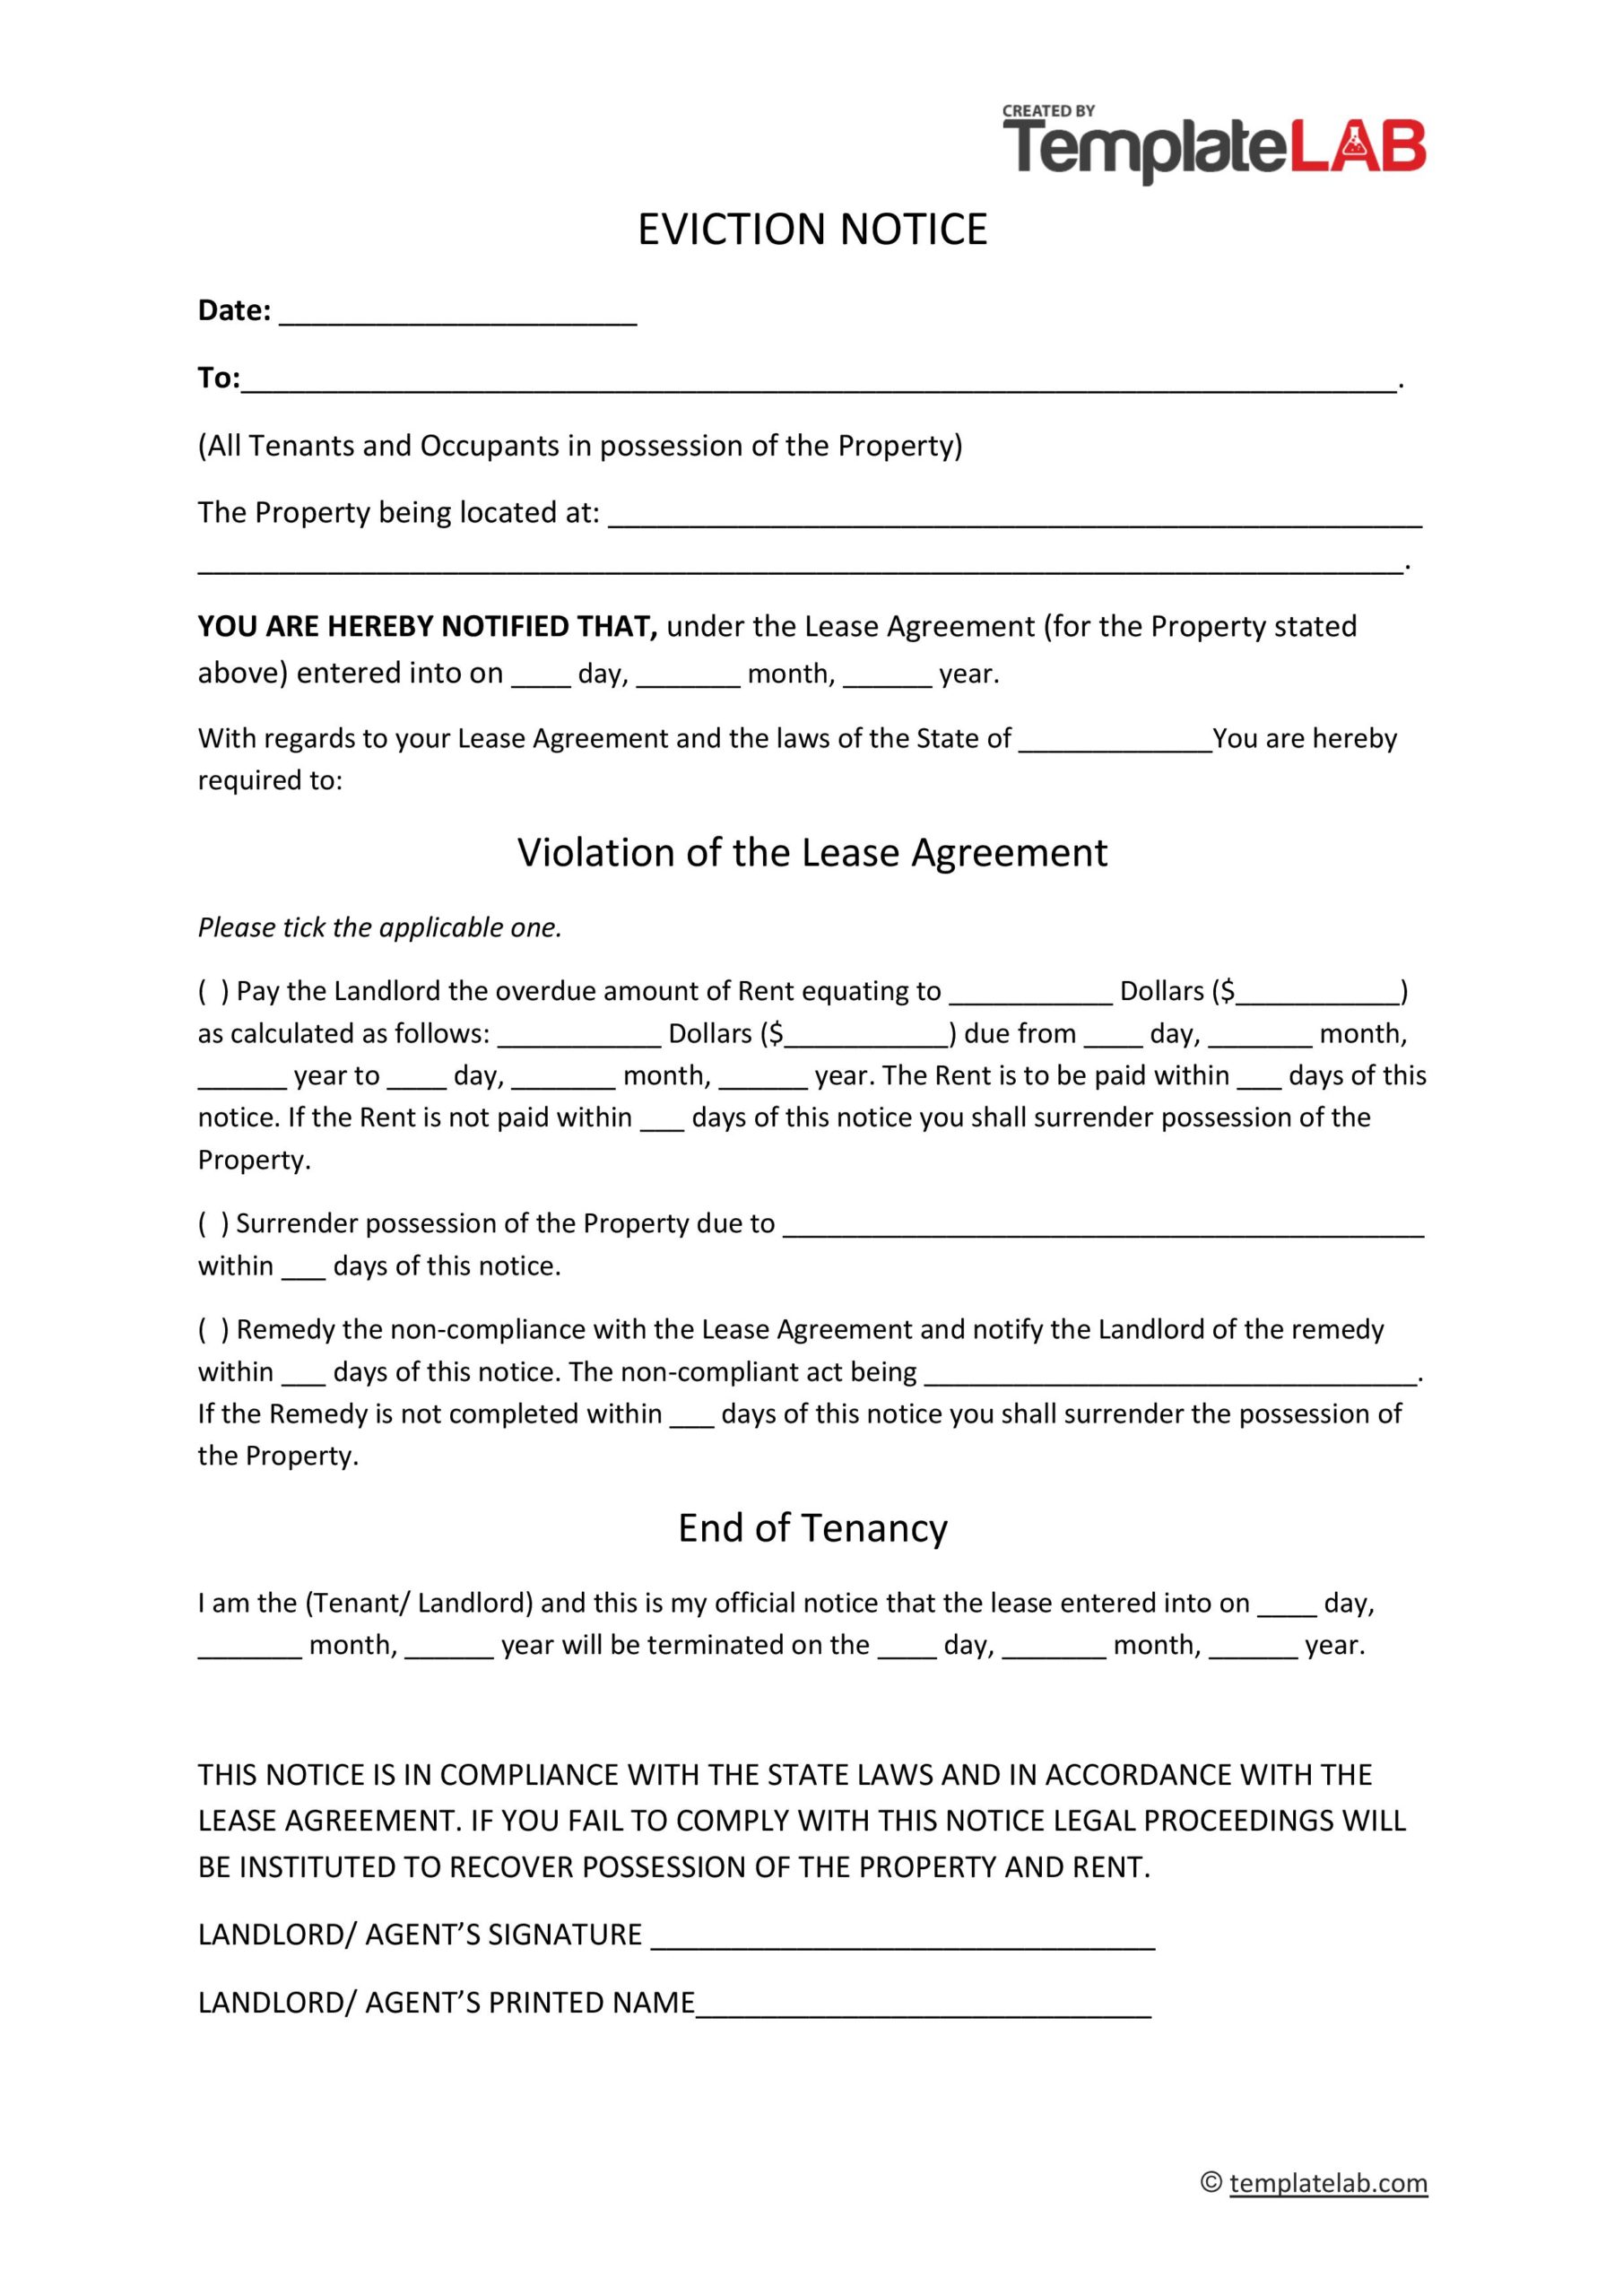 free eviction notice form texas download